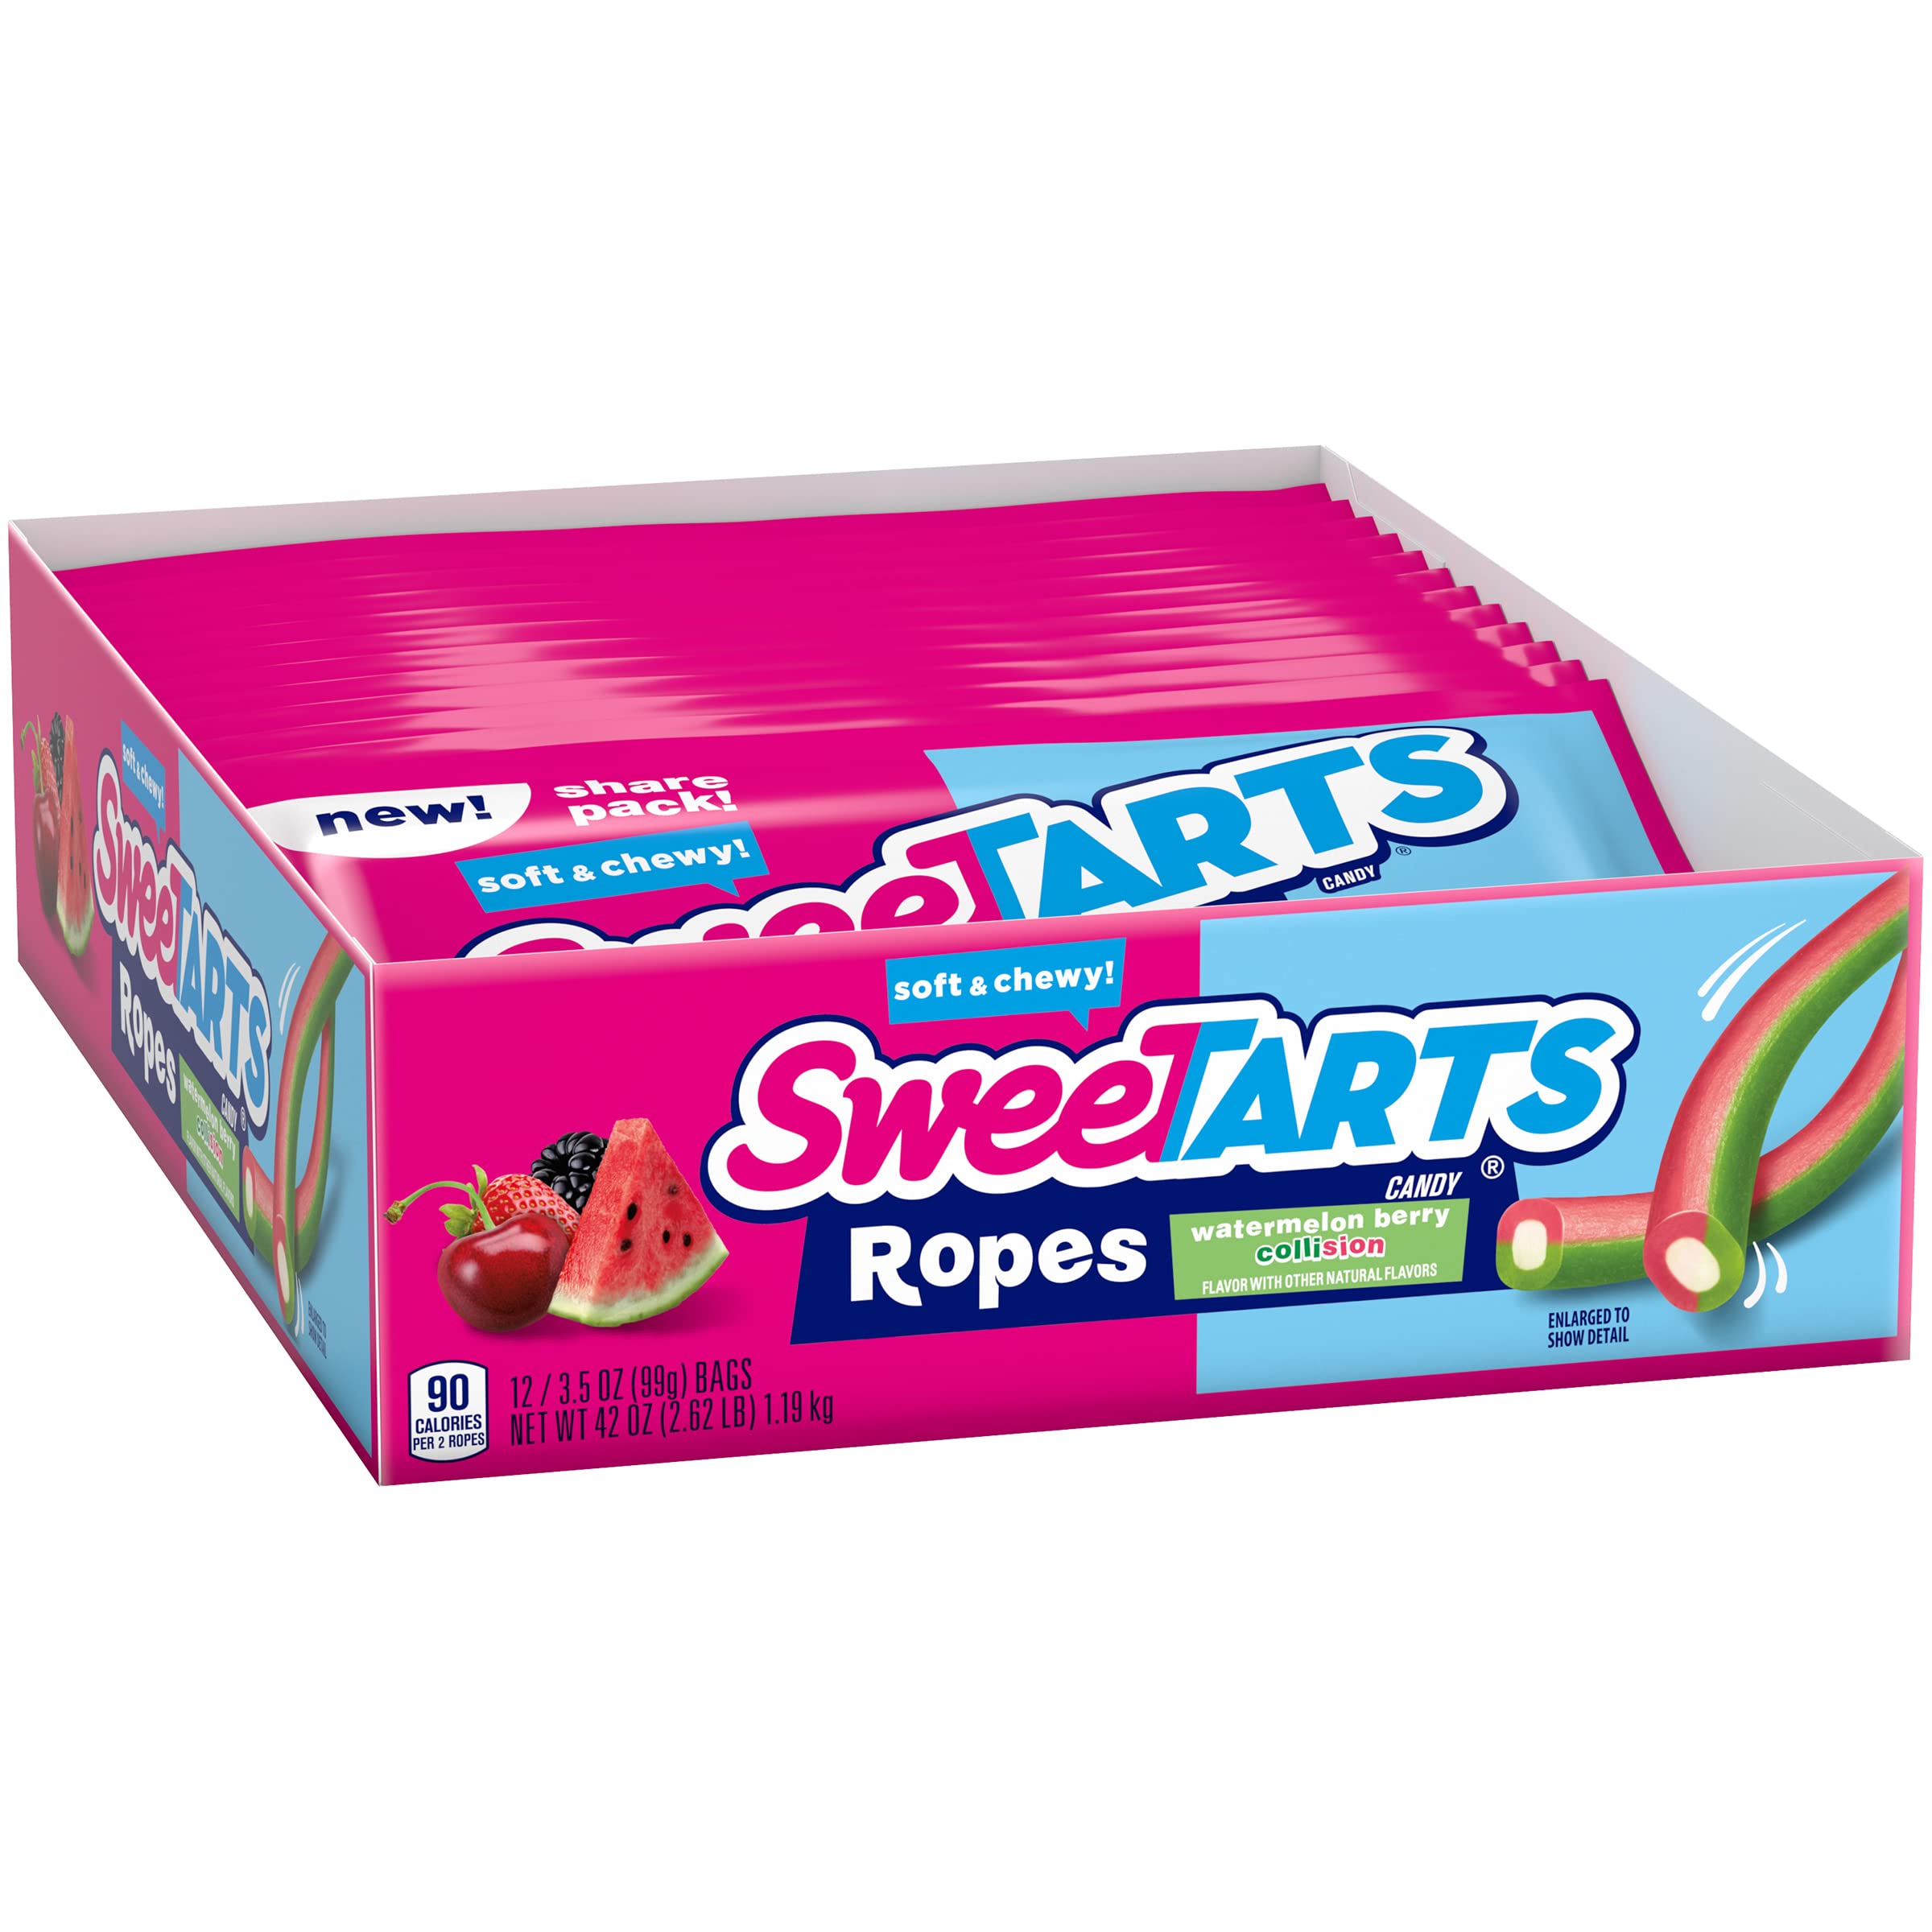 SweeTARTS Soft & chewy Ropes candy Watermelon Berry collision 3.5 Ounce (Pack of 12)